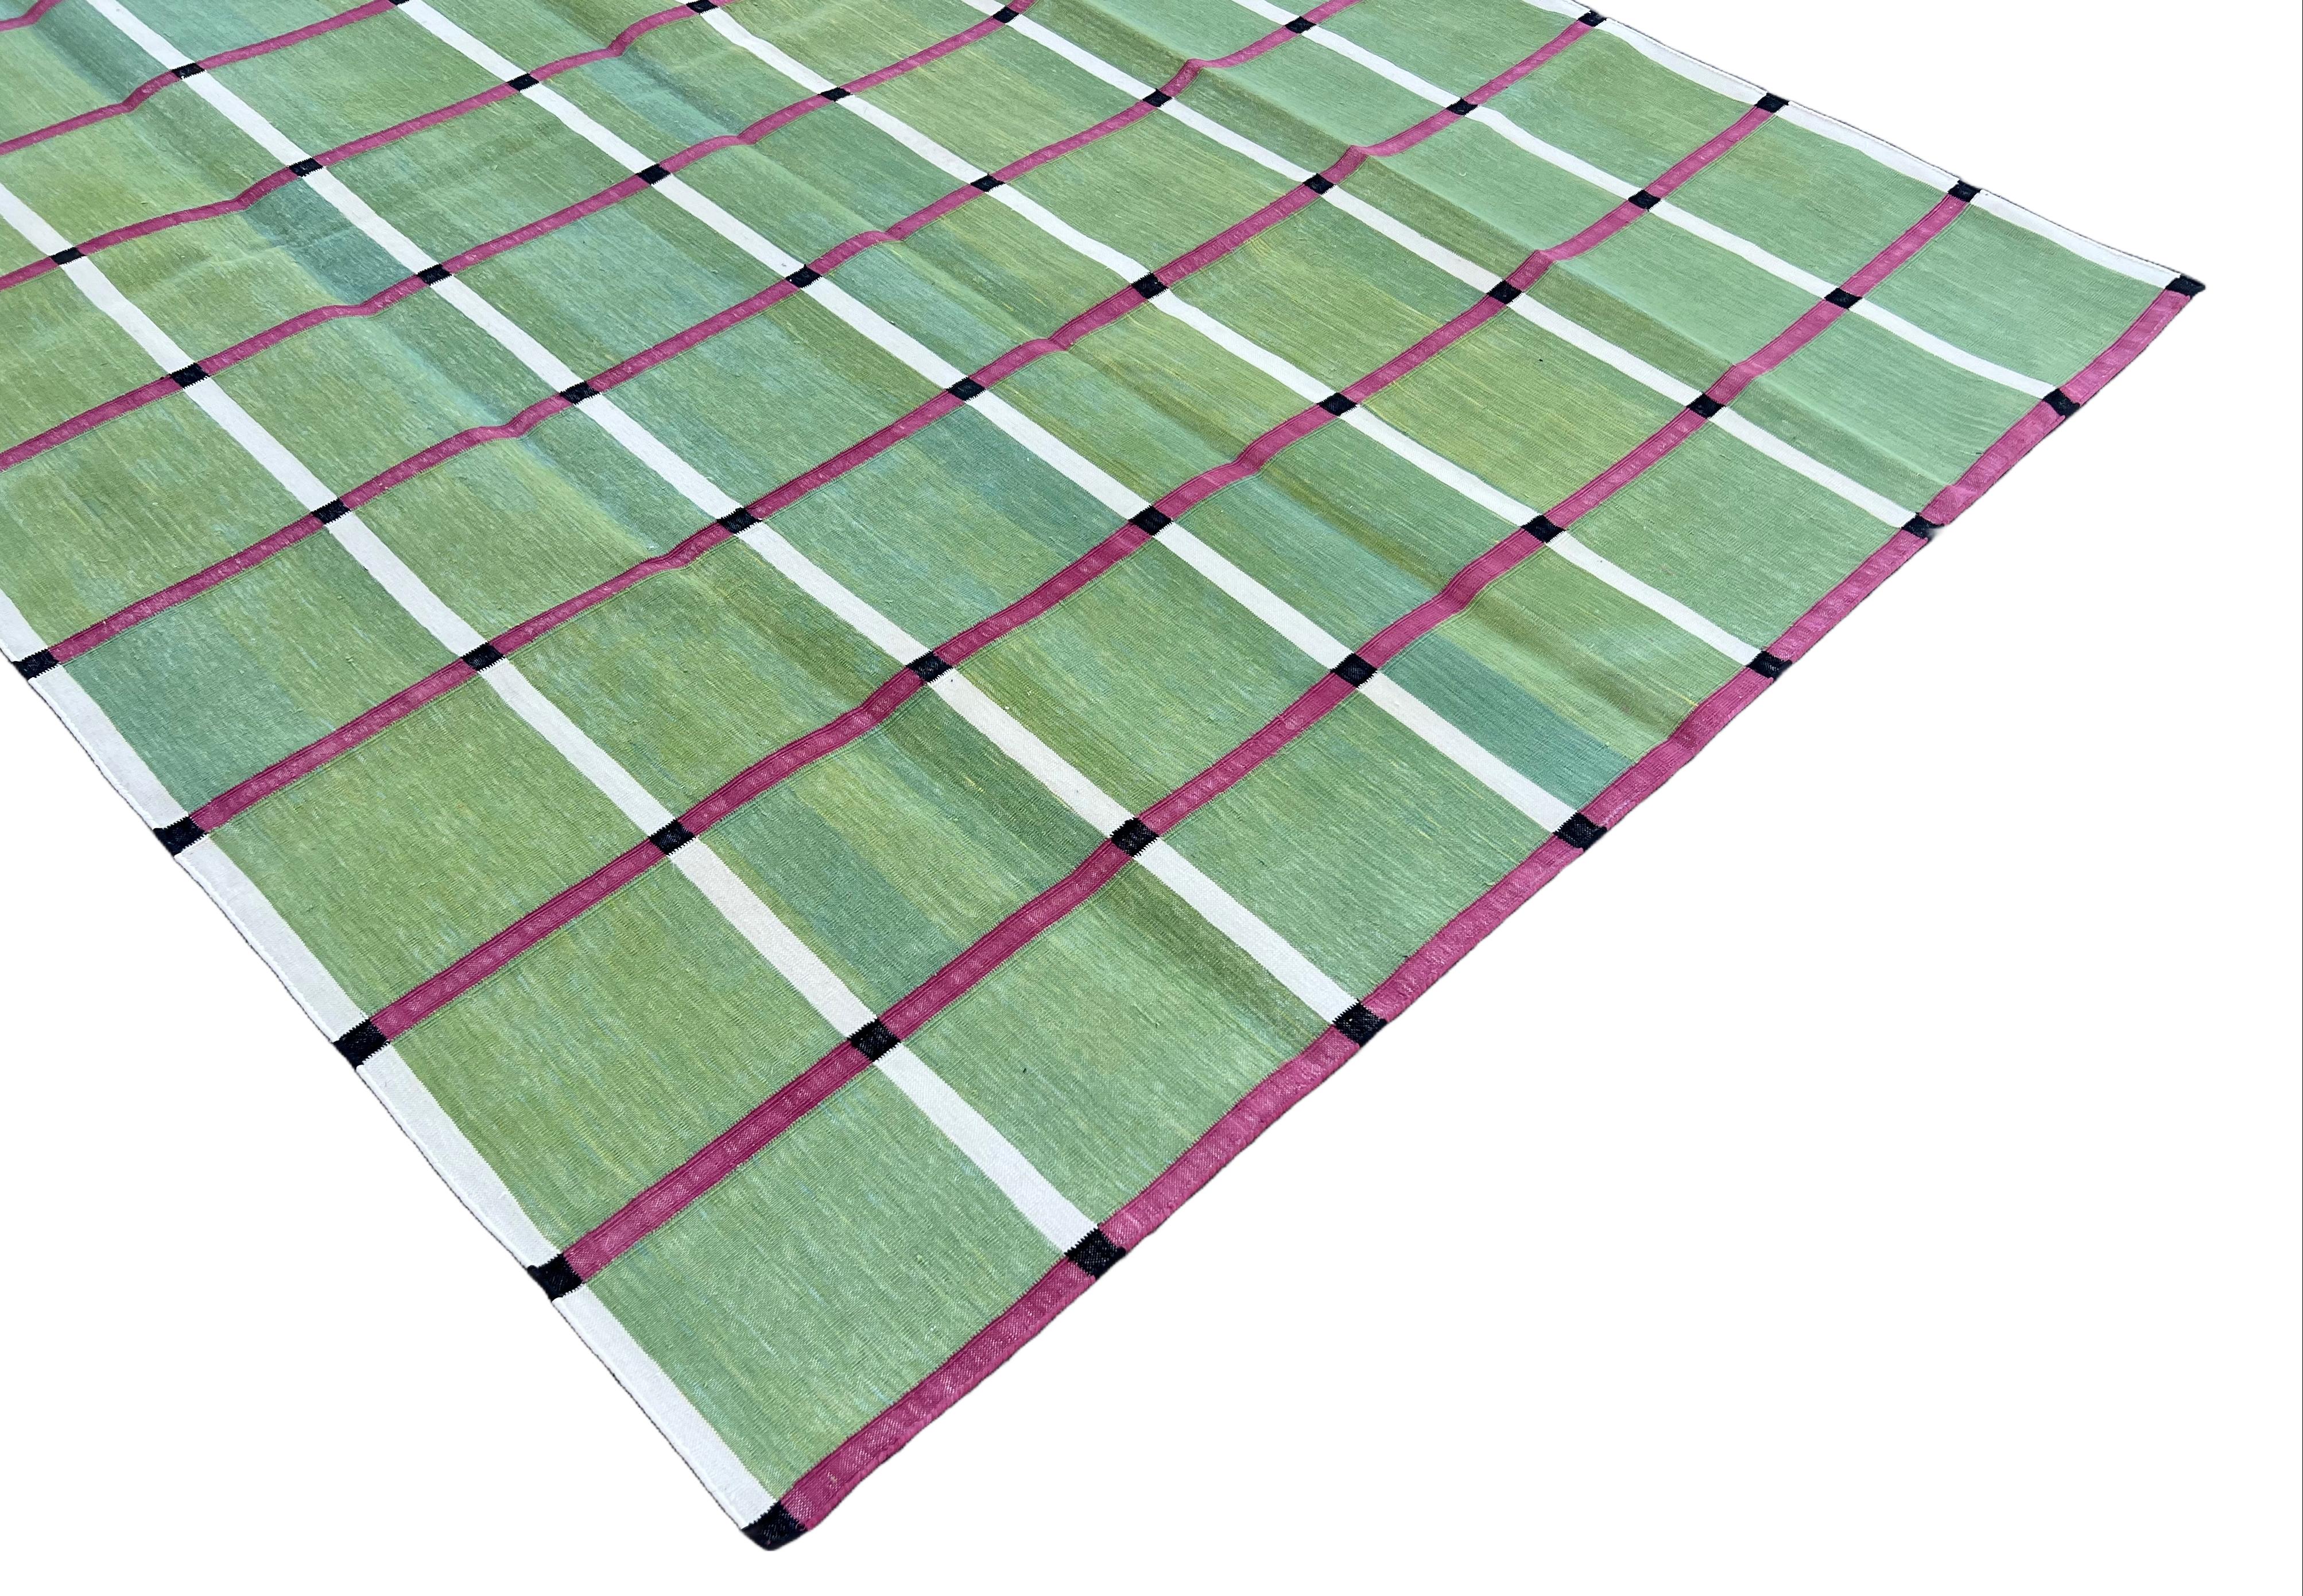 Hand-Woven Handmade Cotton Area Flat Weave Rug, Green, Pink Windowpane Check Indian Dhurrie For Sale